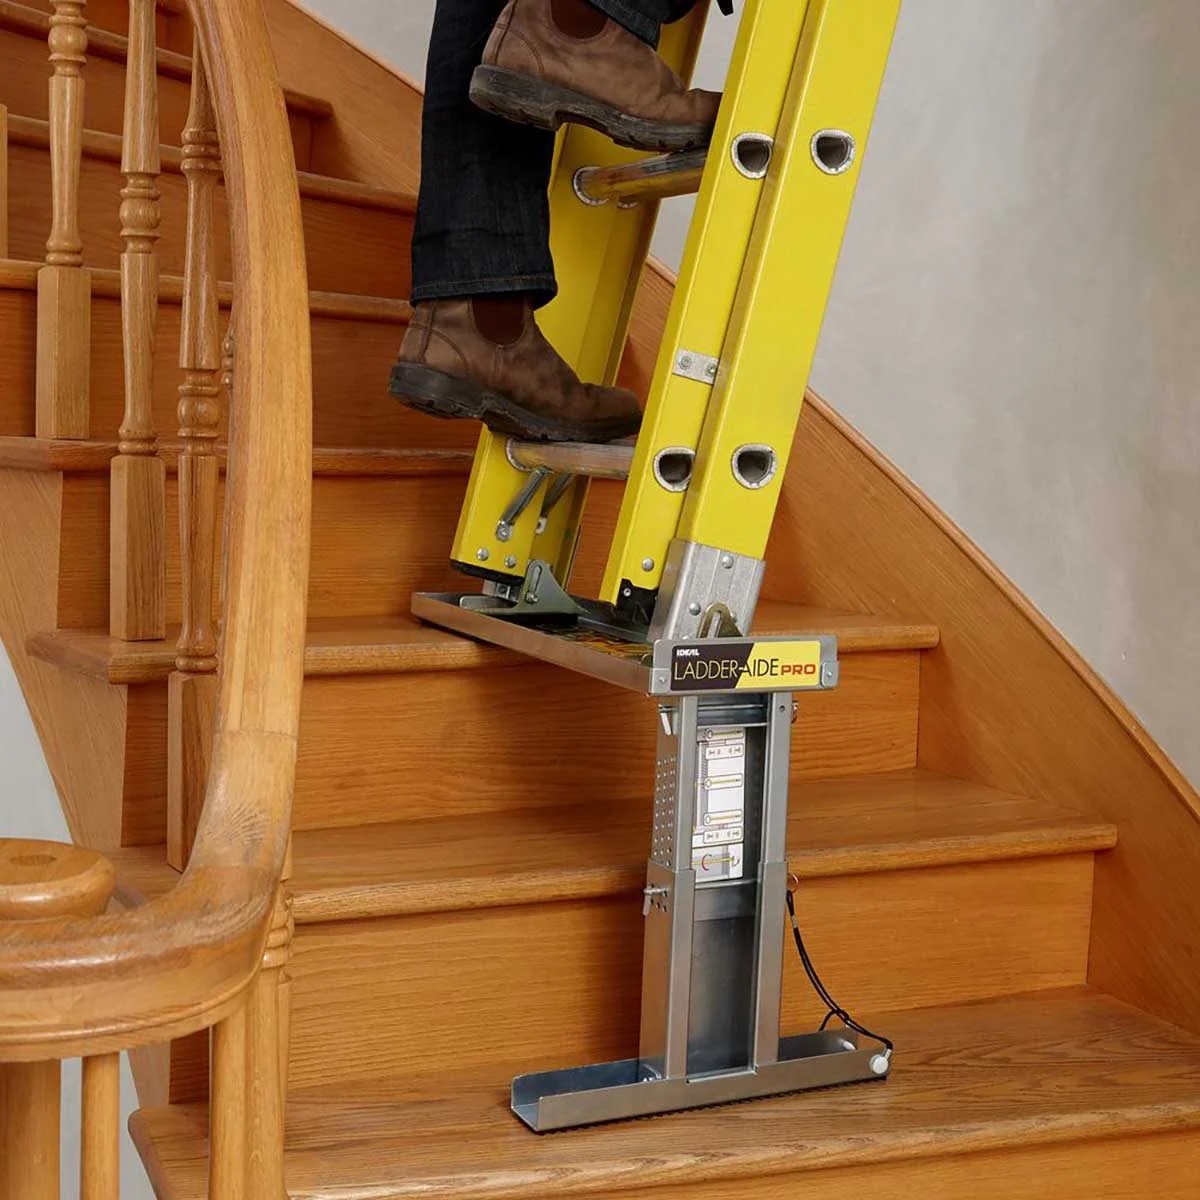 How To Place A Ladder On Stairs